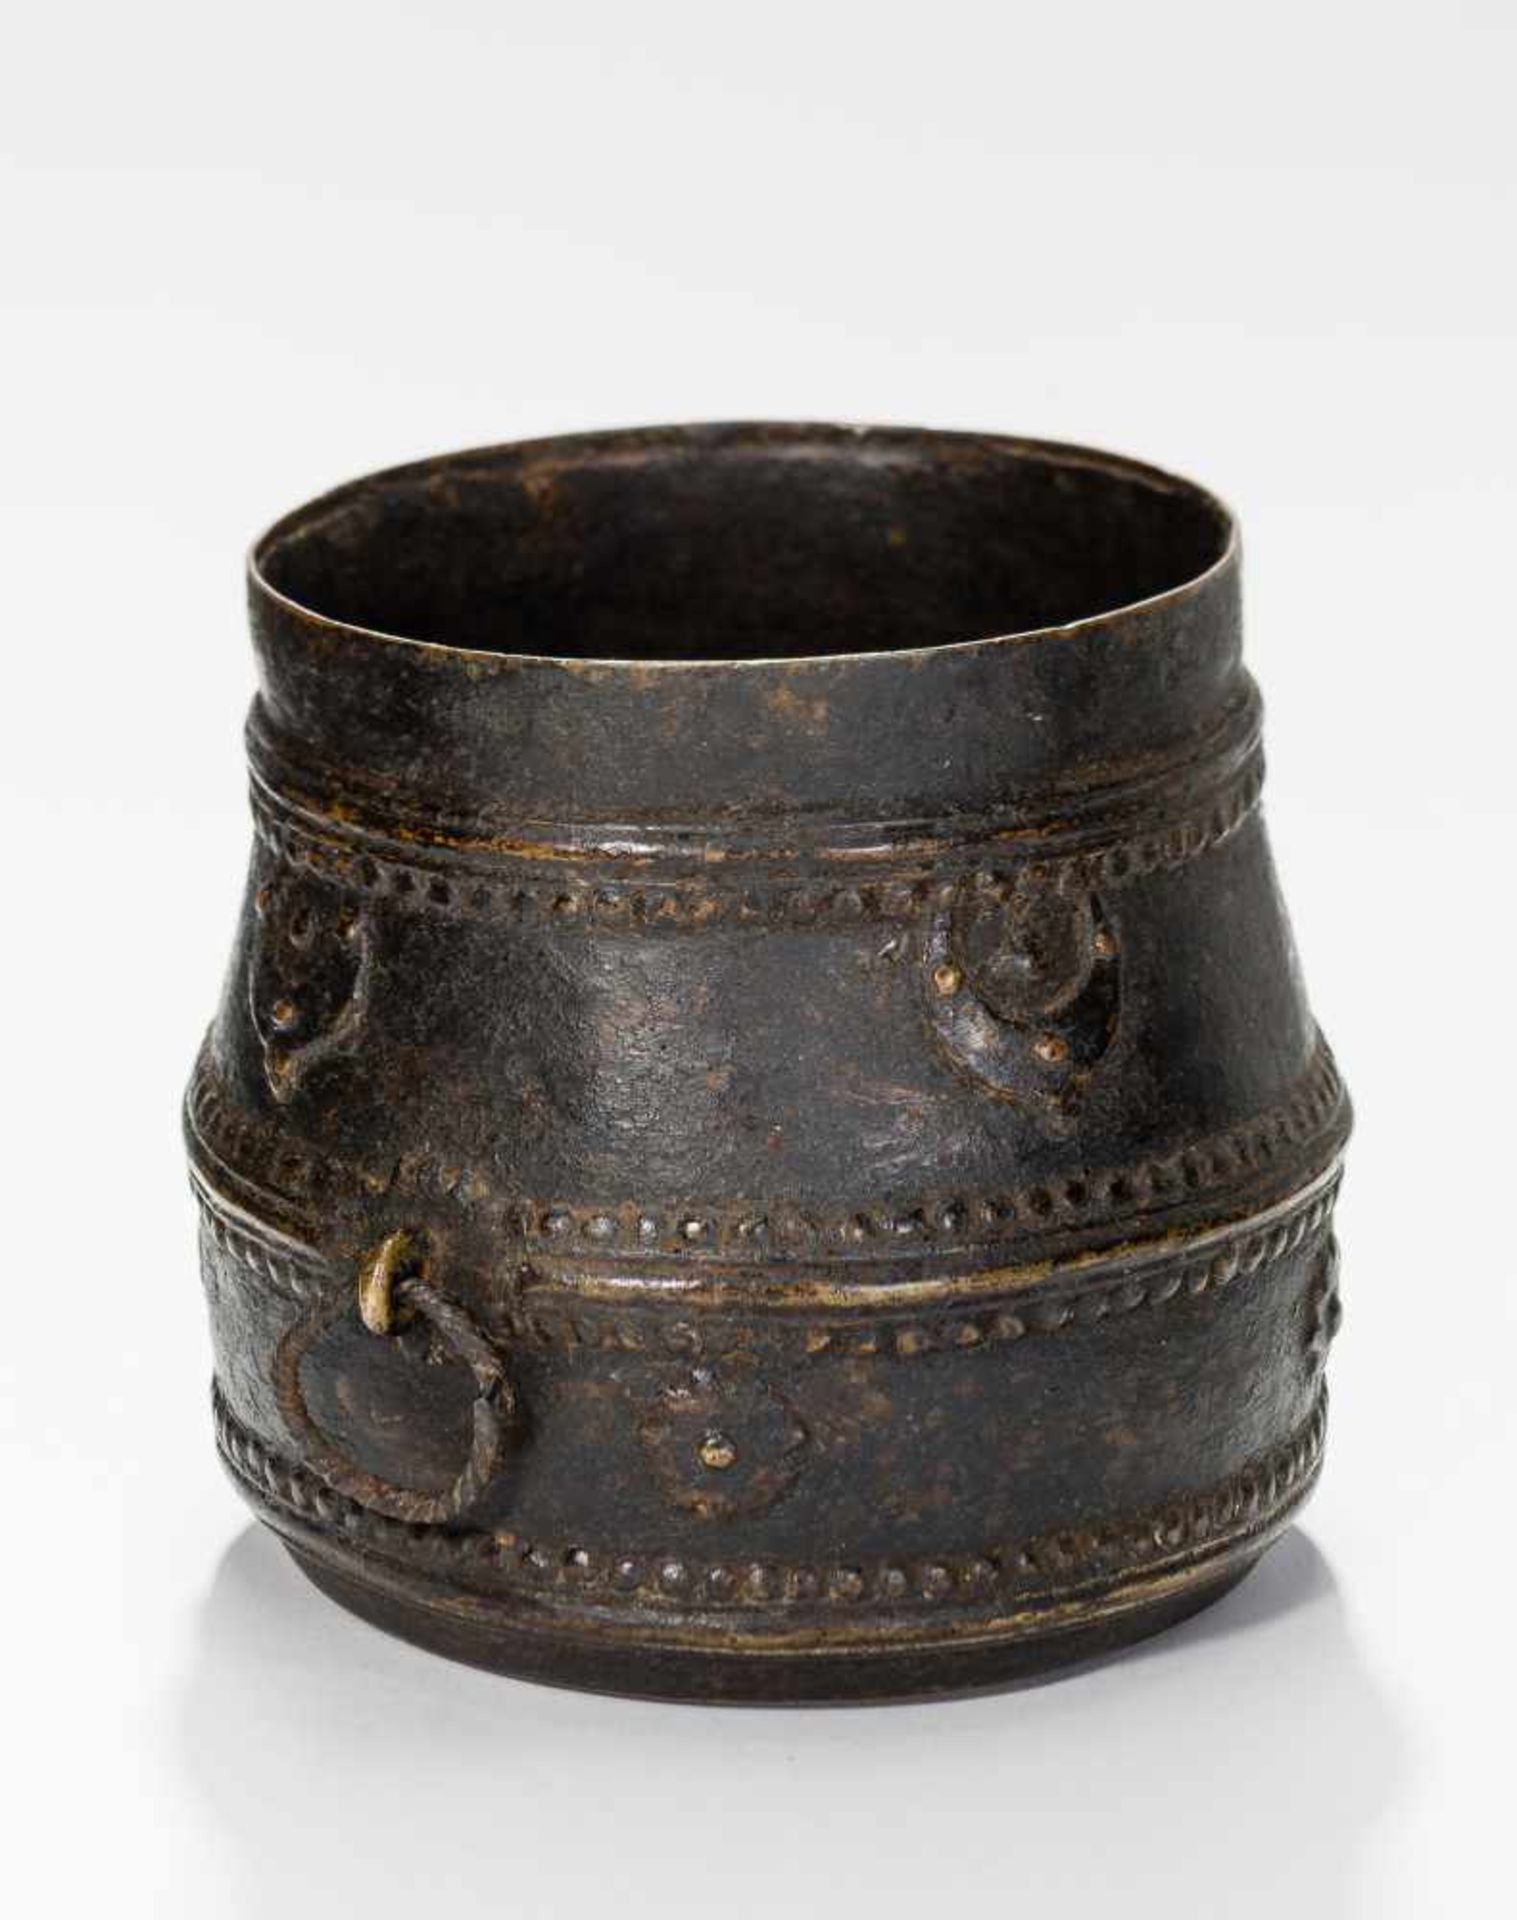 A BRONZE BASTAR CUPBronzeIndia, Bastar, 19th-20th centuryThis rare piece once served to measure